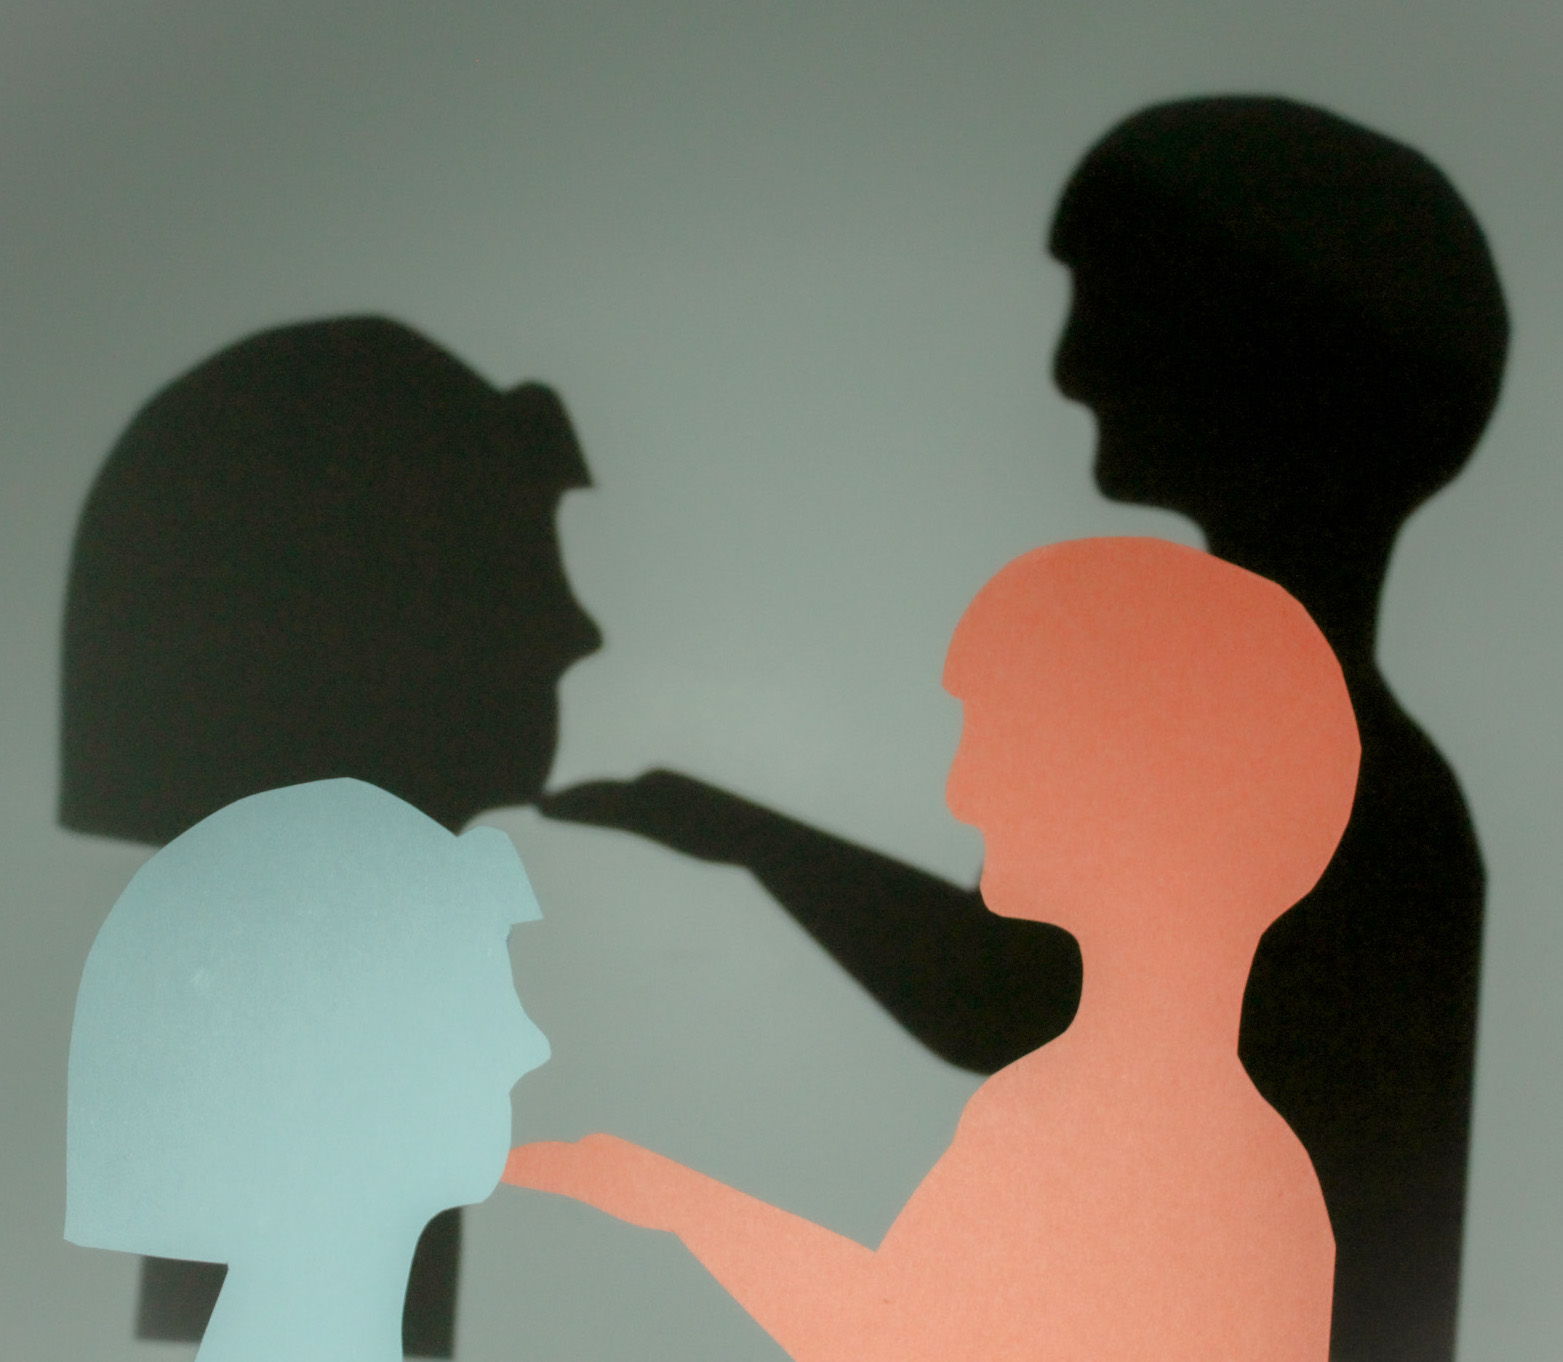 simple illustration of a young feminine figure having their chin held by a masculine older figure, their dark silhouettes behind them.